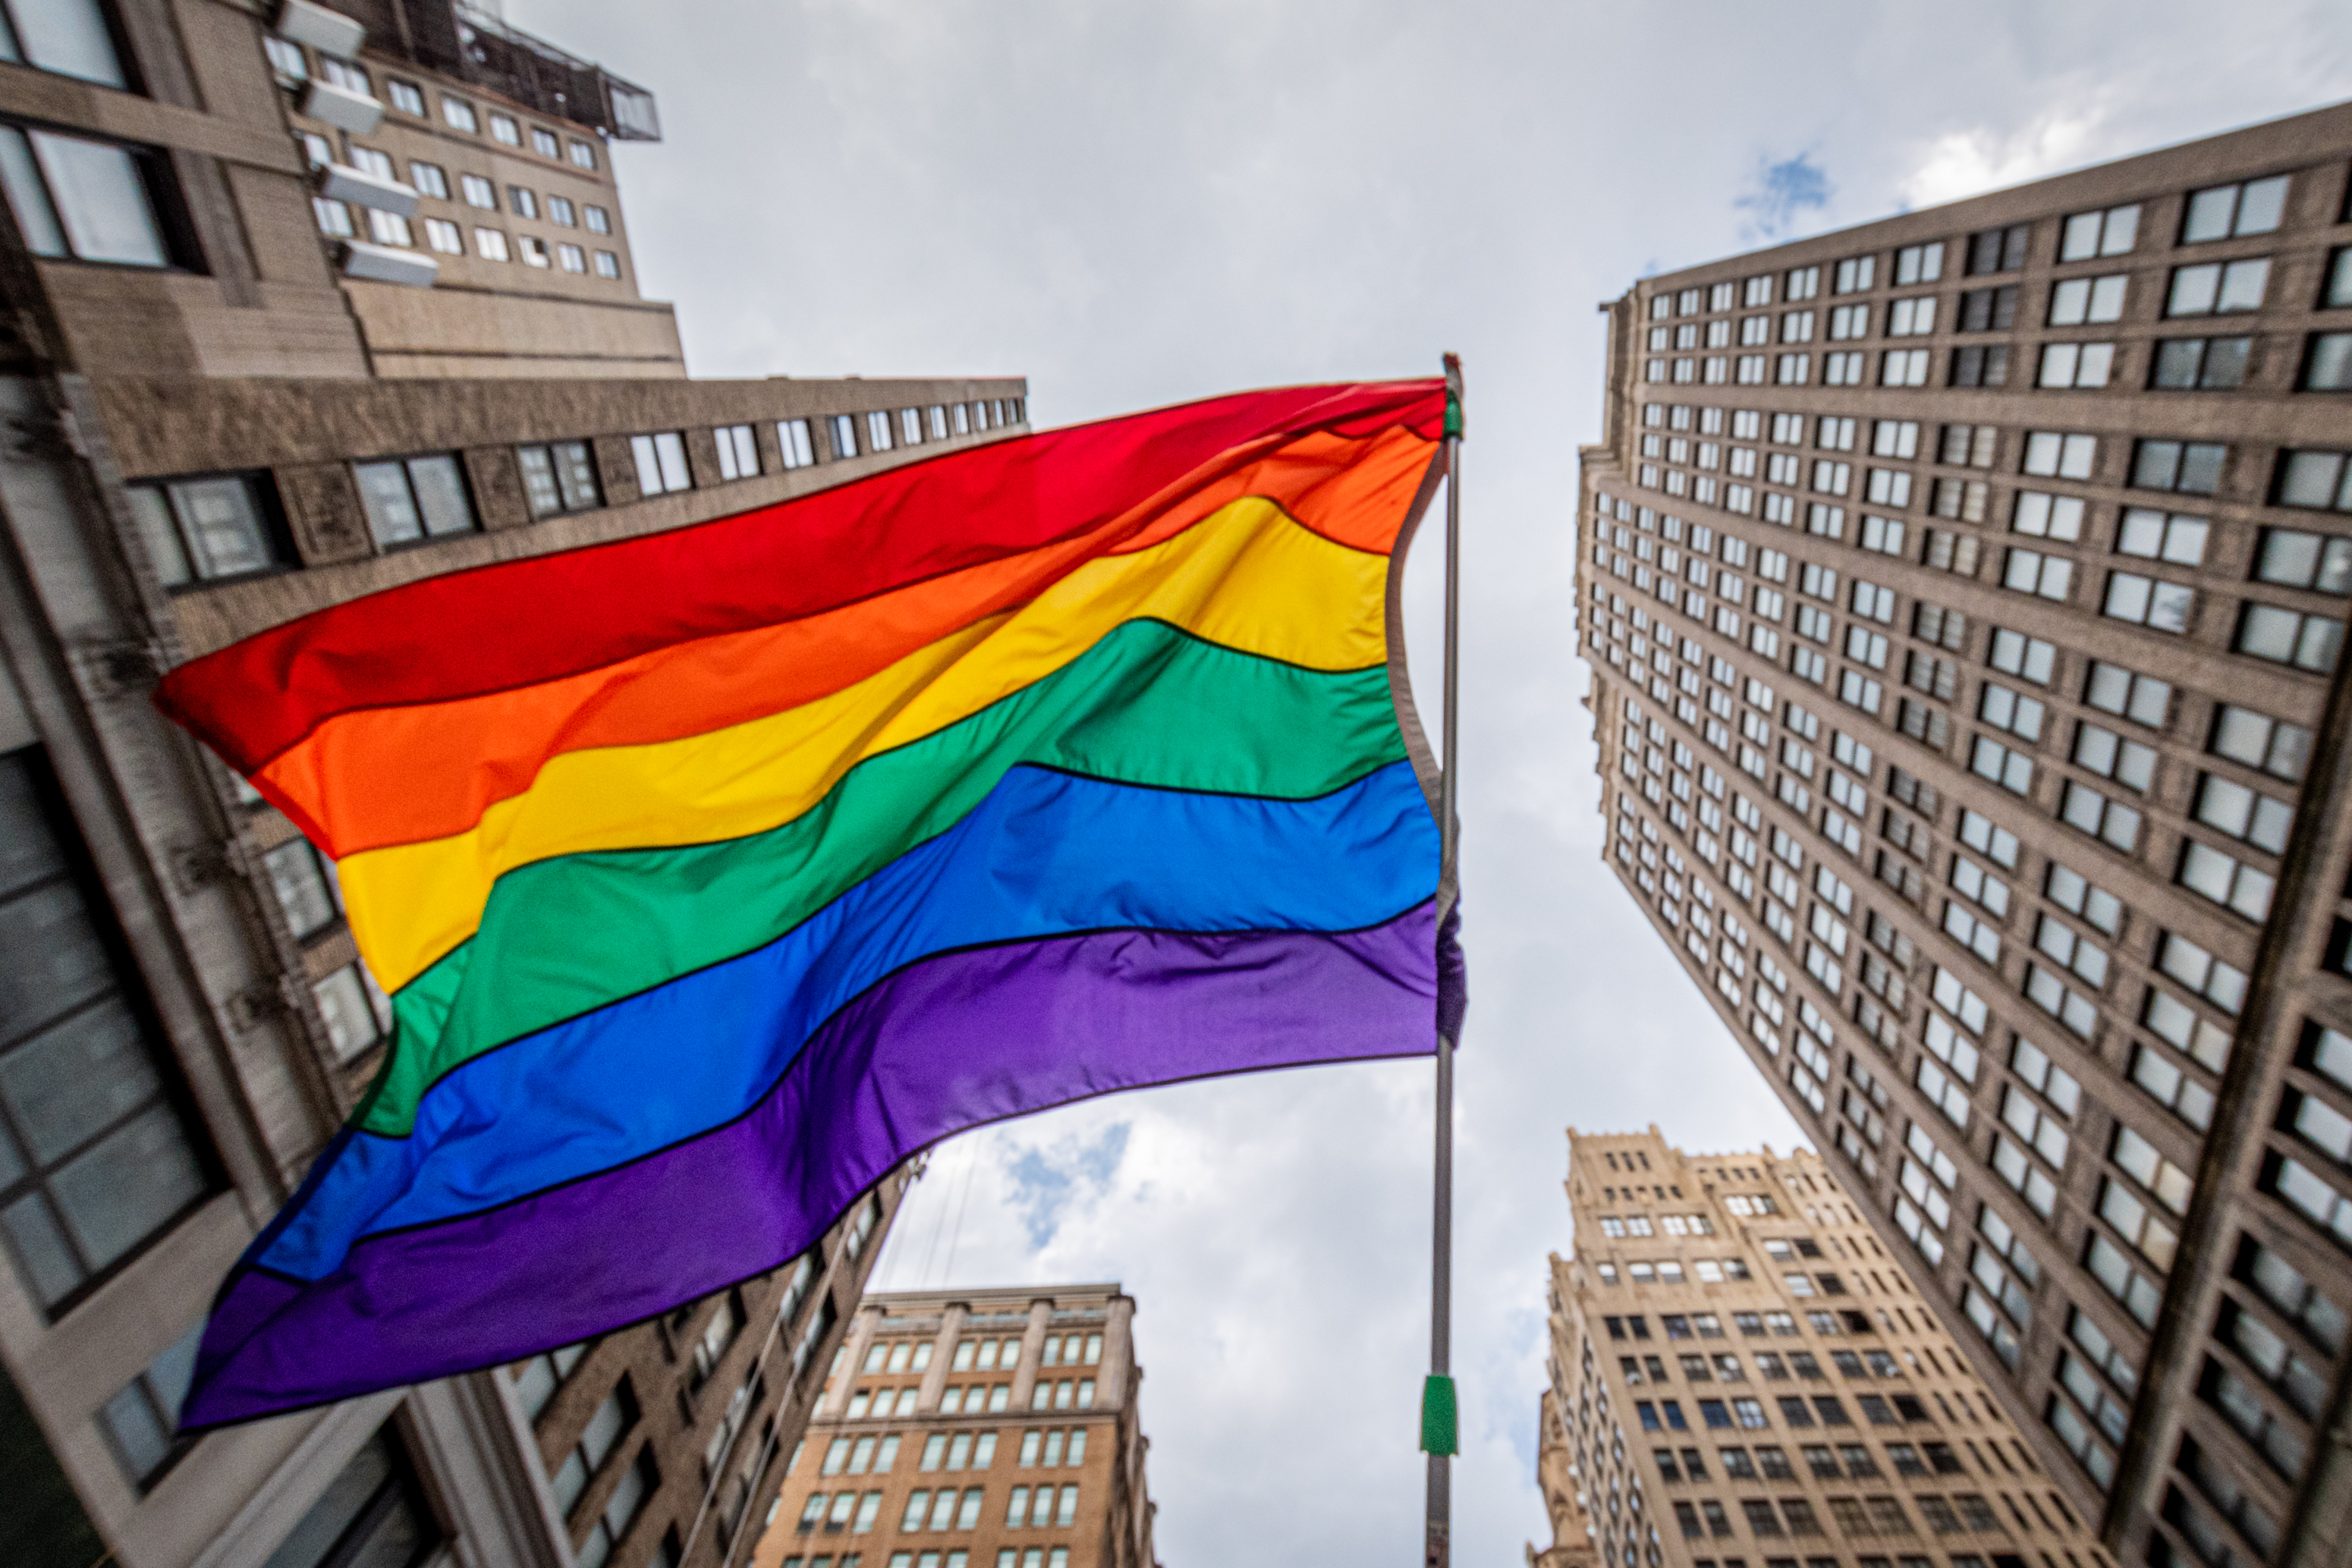 A rainbow flag seen flying at the march on June 27, 2021 in Manhattan, New York (Erik McGregor — LightRocket via Getty Images)